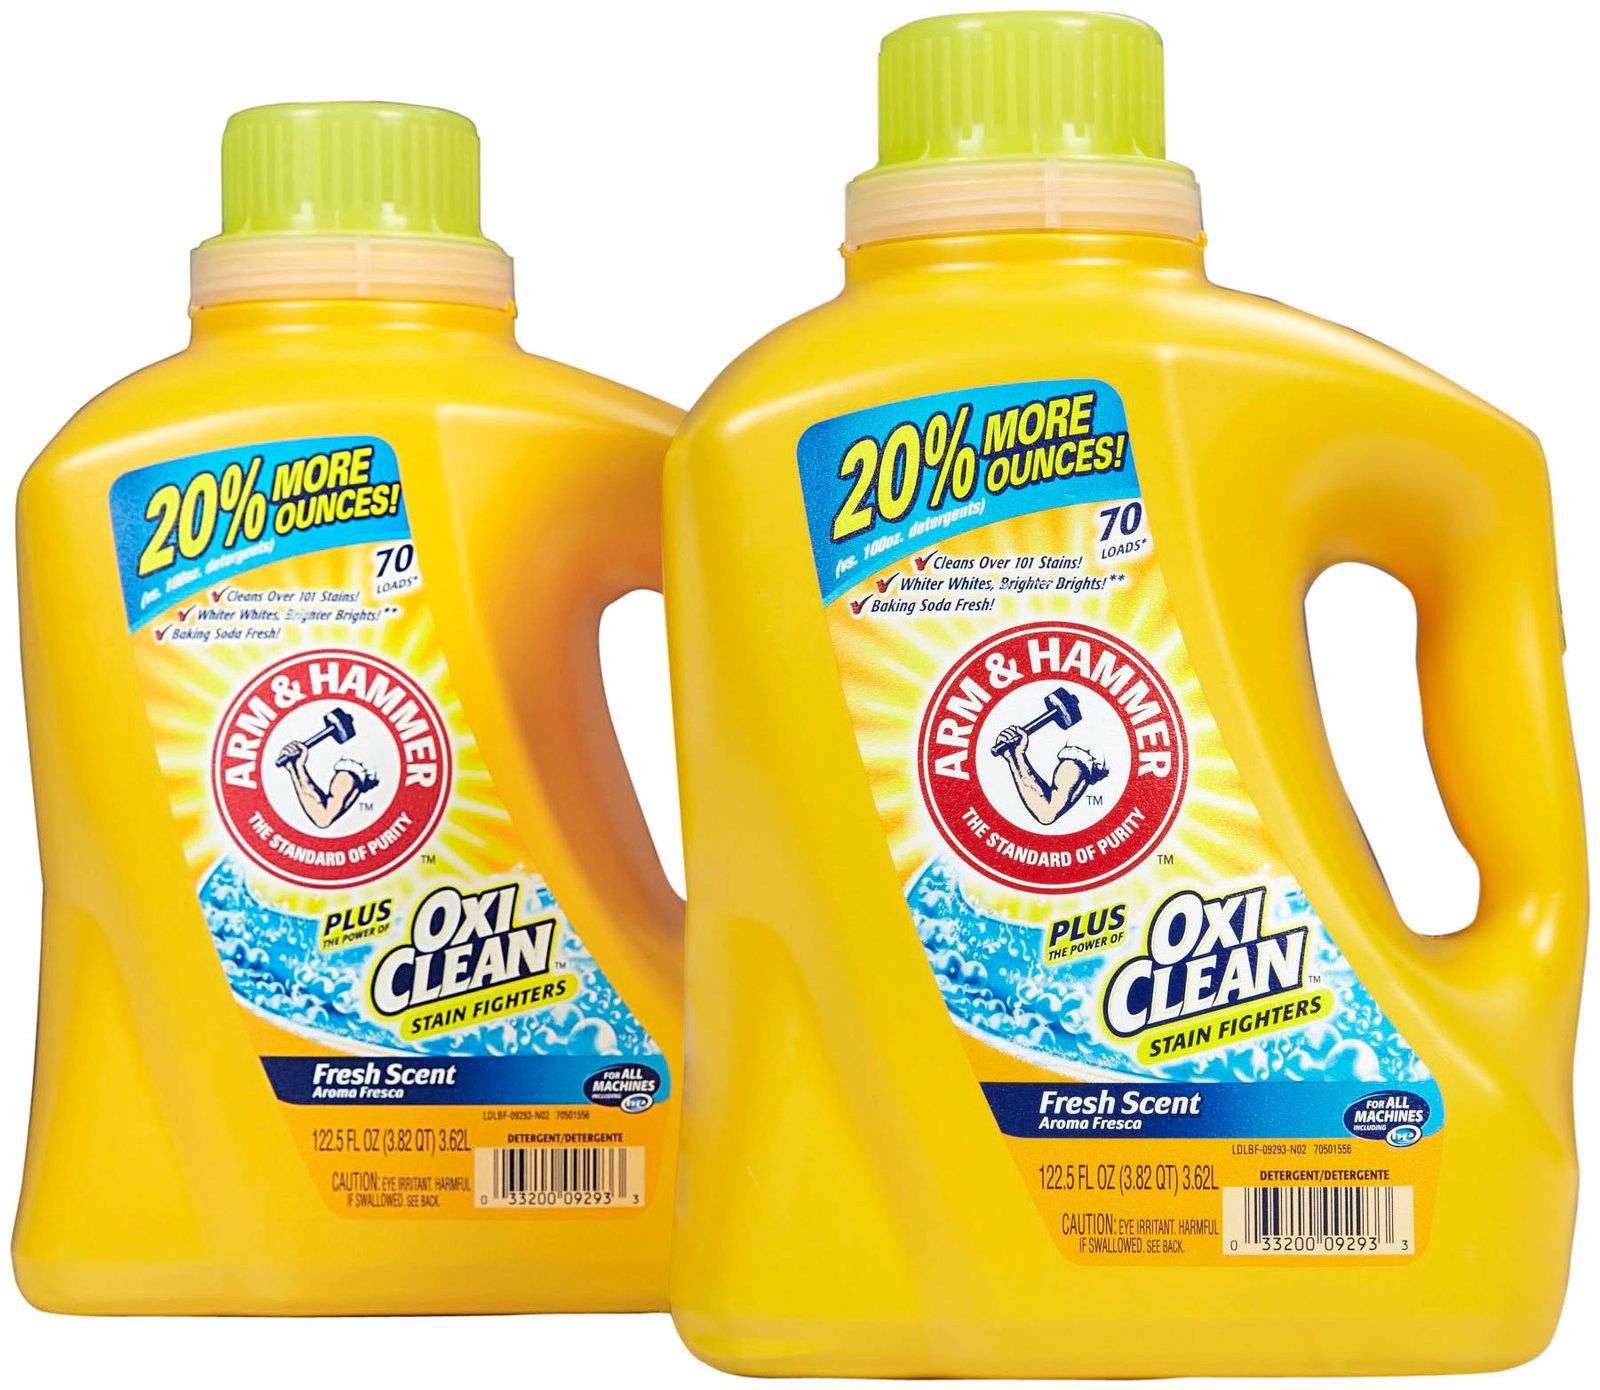 Arm and Hammer Plus OxiClean Laundry Detergent Review